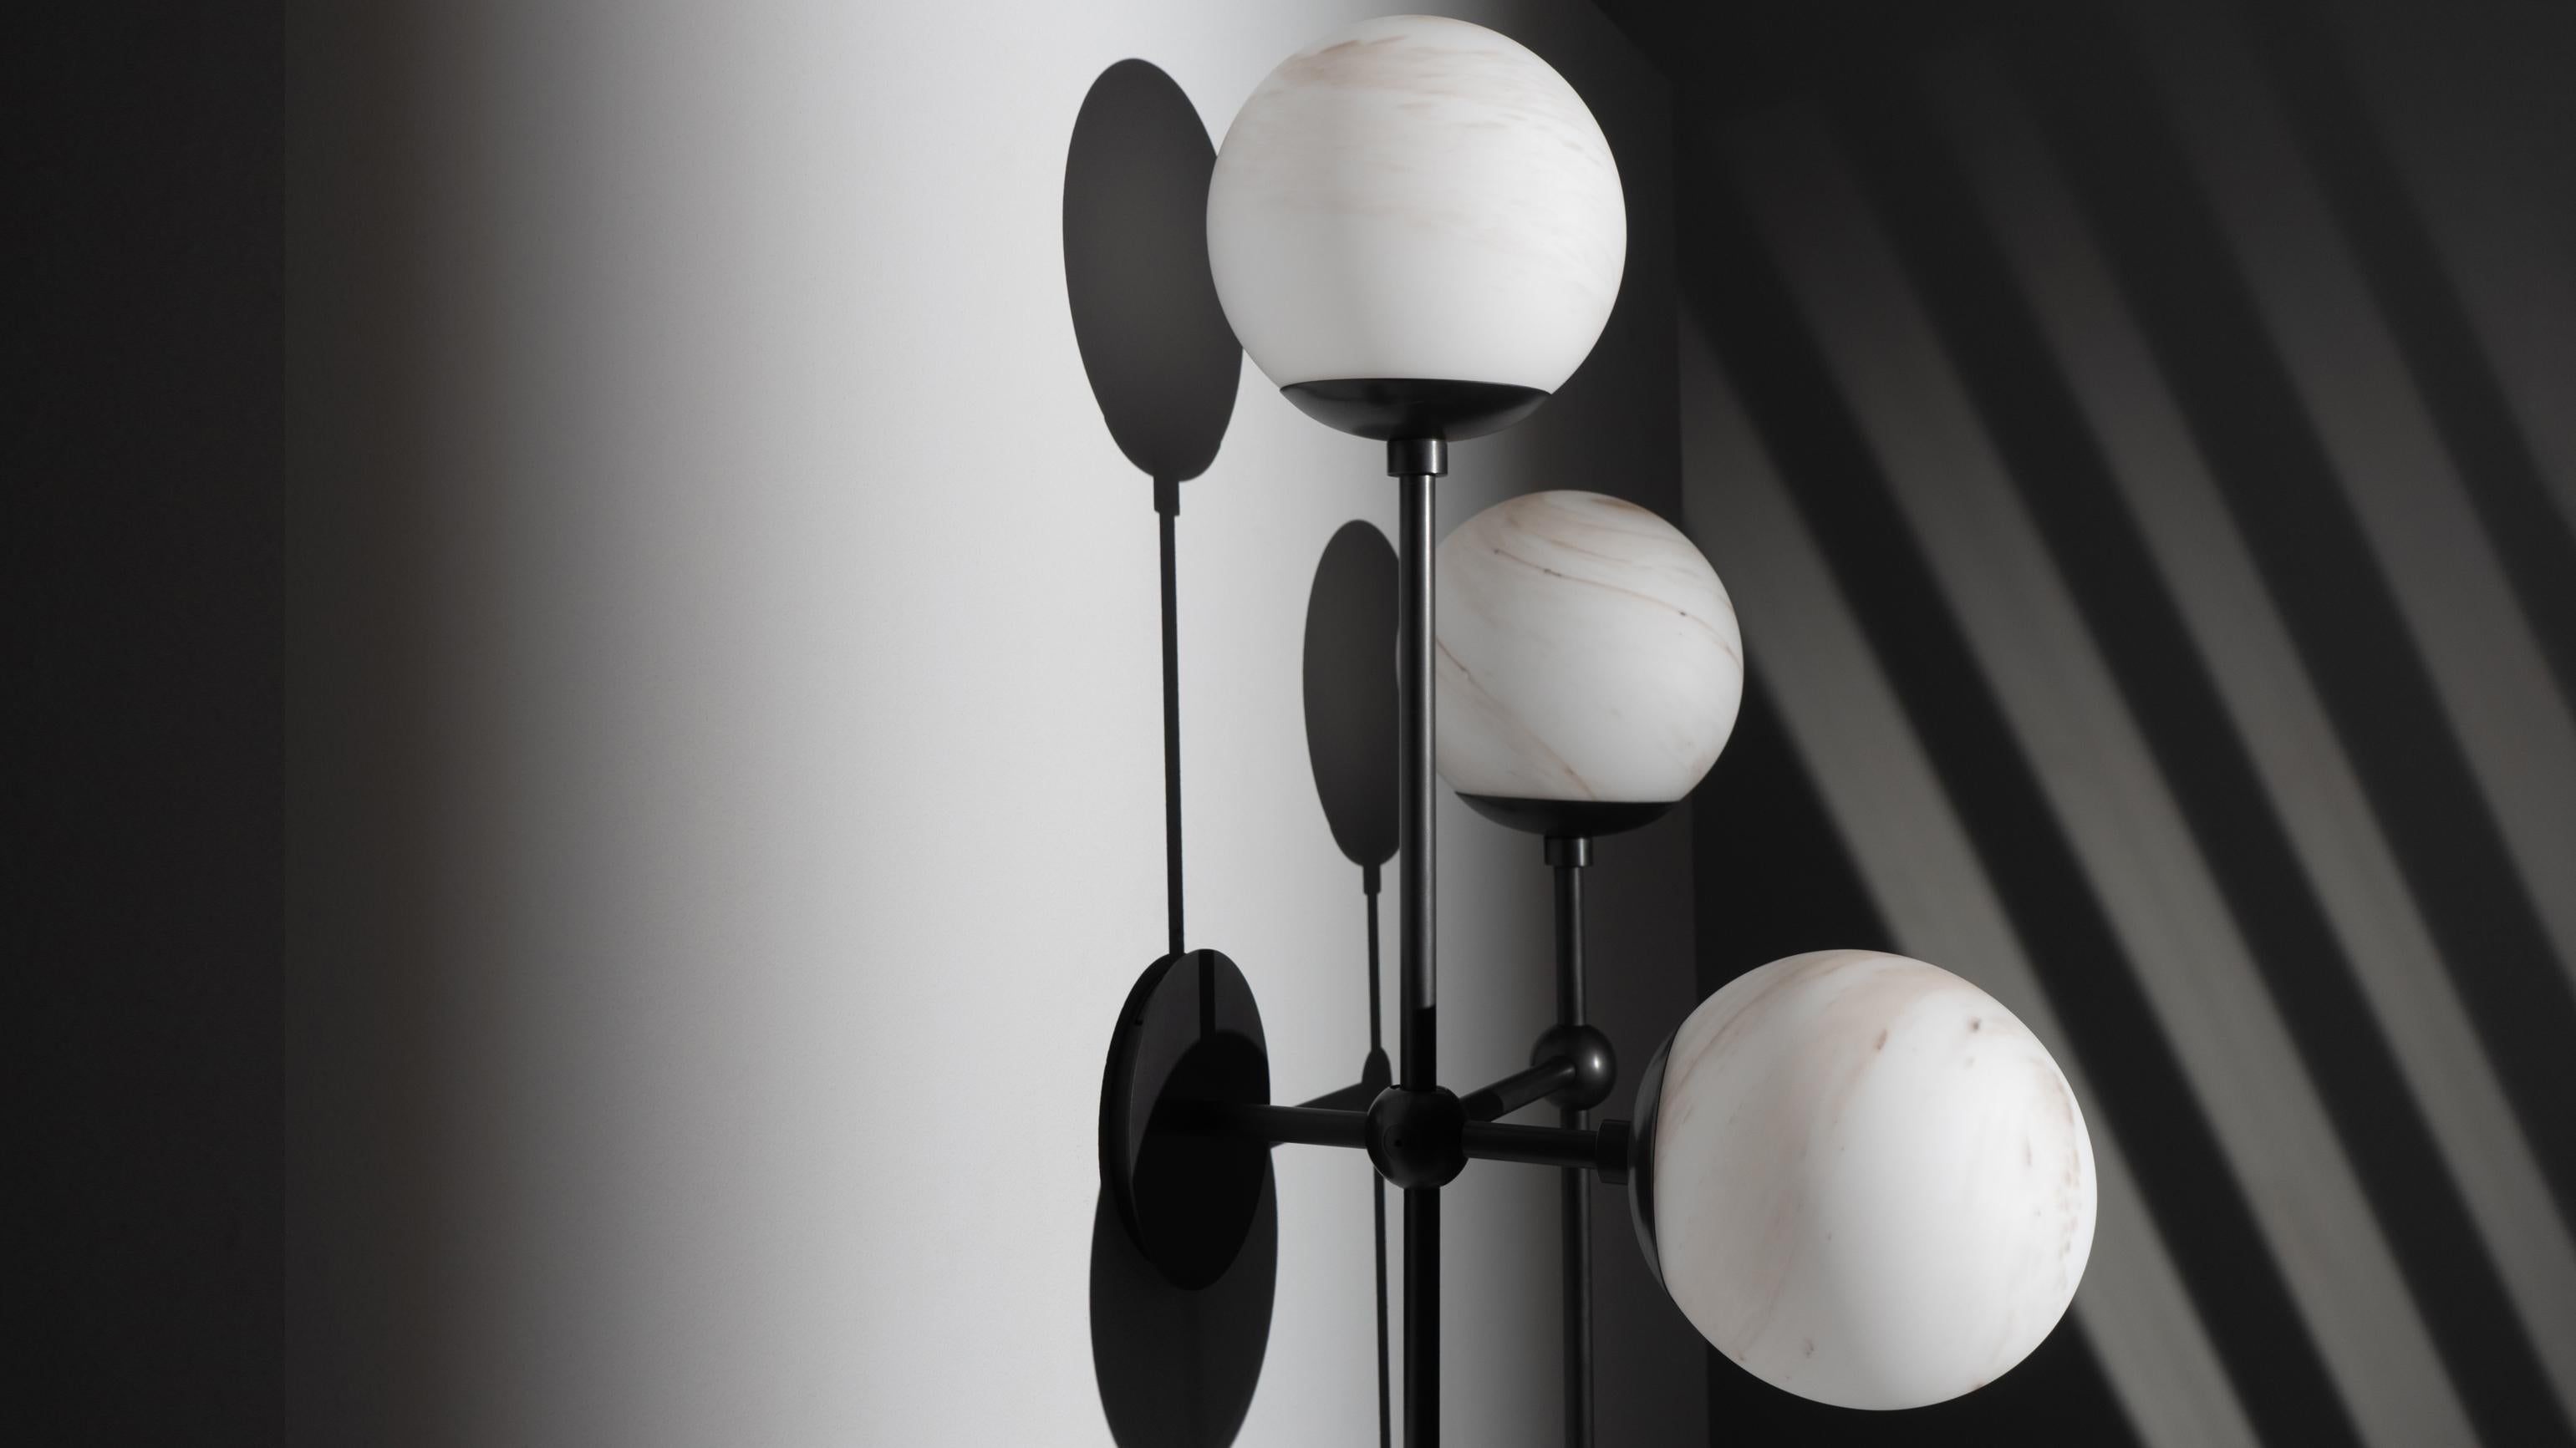 Gravity-defying playfulness requires technical precision. Suggestive minimalism of connective nodes creates a grid-like metal structure-- punctuated by four glass globes.

Available in our three signature finishes: Lacquered Burnished Brass (LBB);